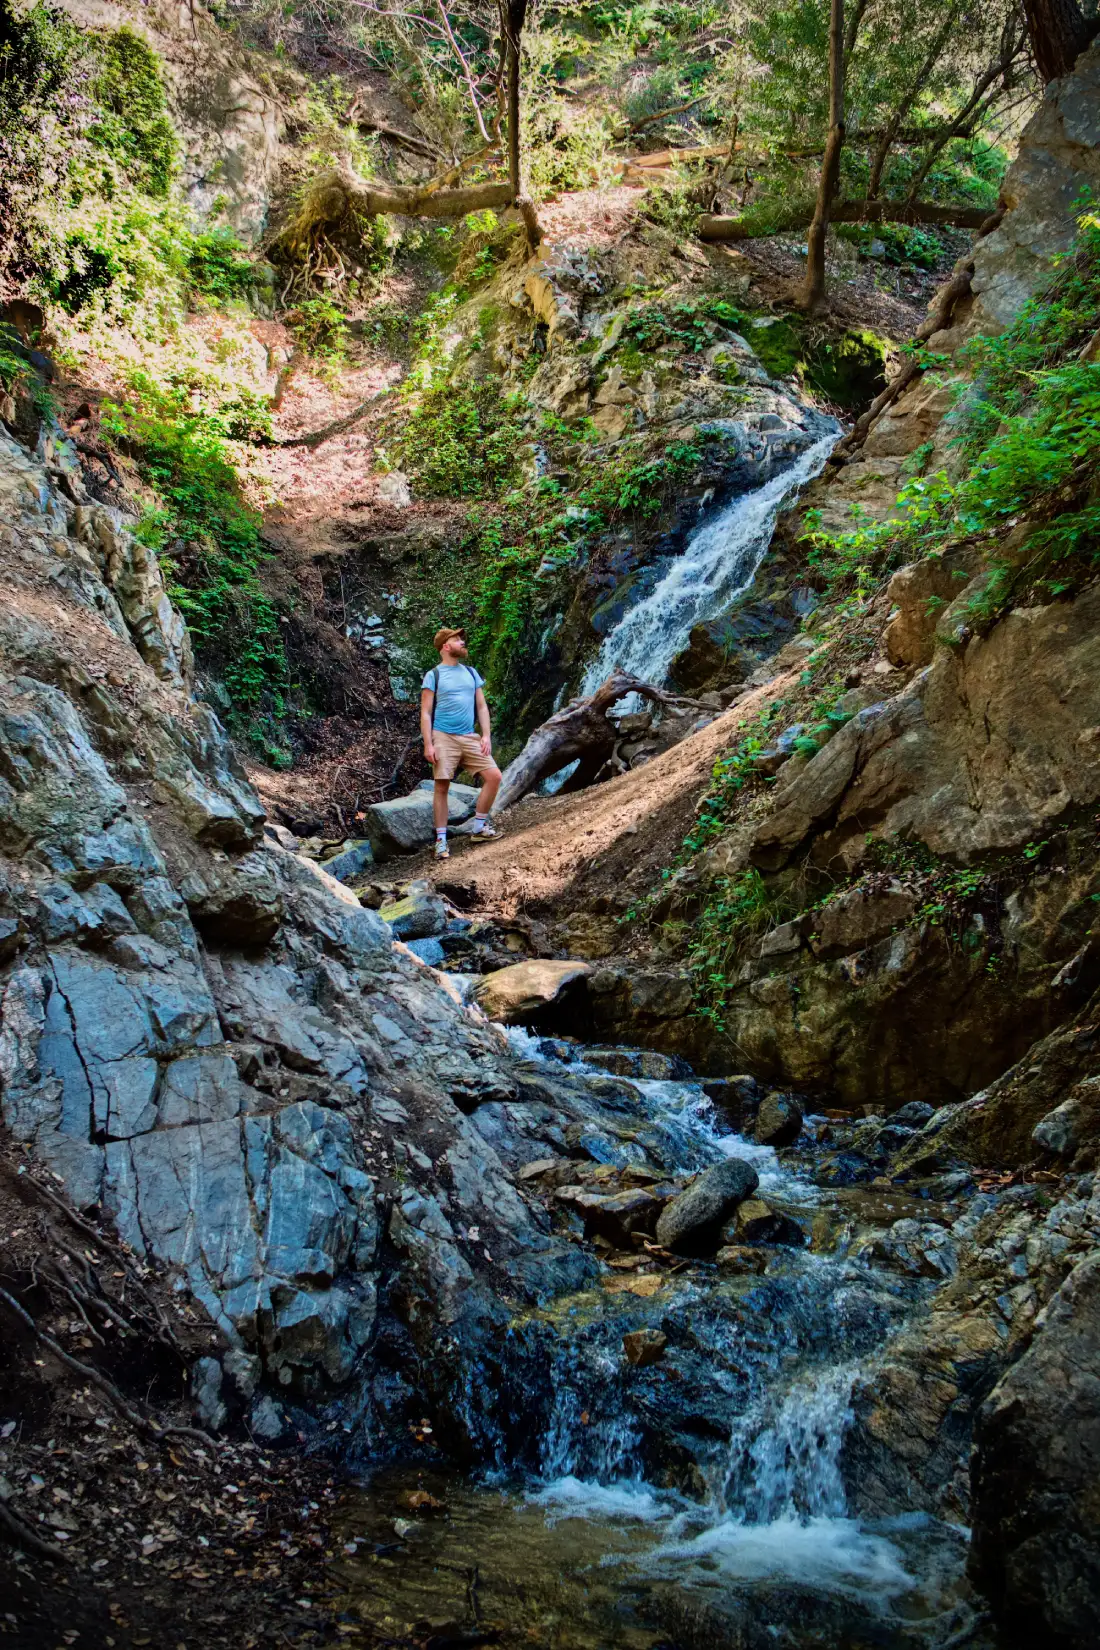 Daan proudly posing at the of the Waterfall Trail at Placerita Canyon © Coupleofmen.com